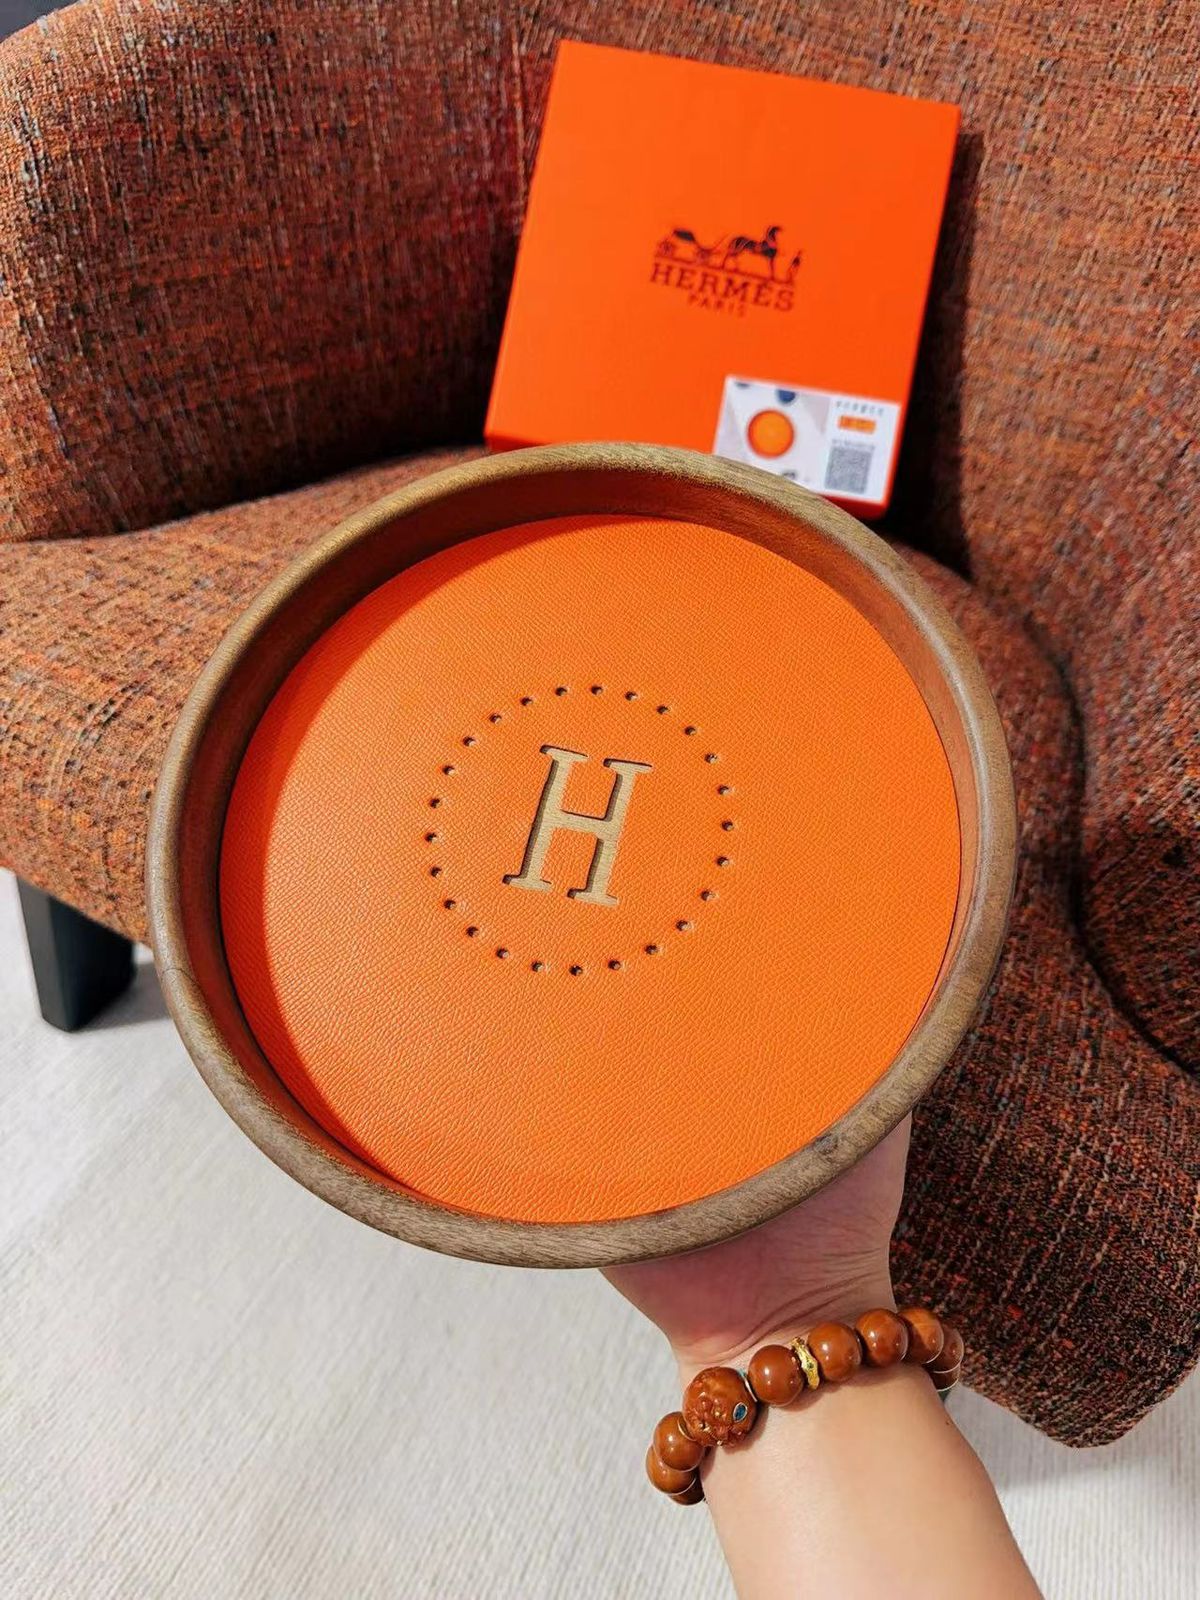 Hermes small rounded tray